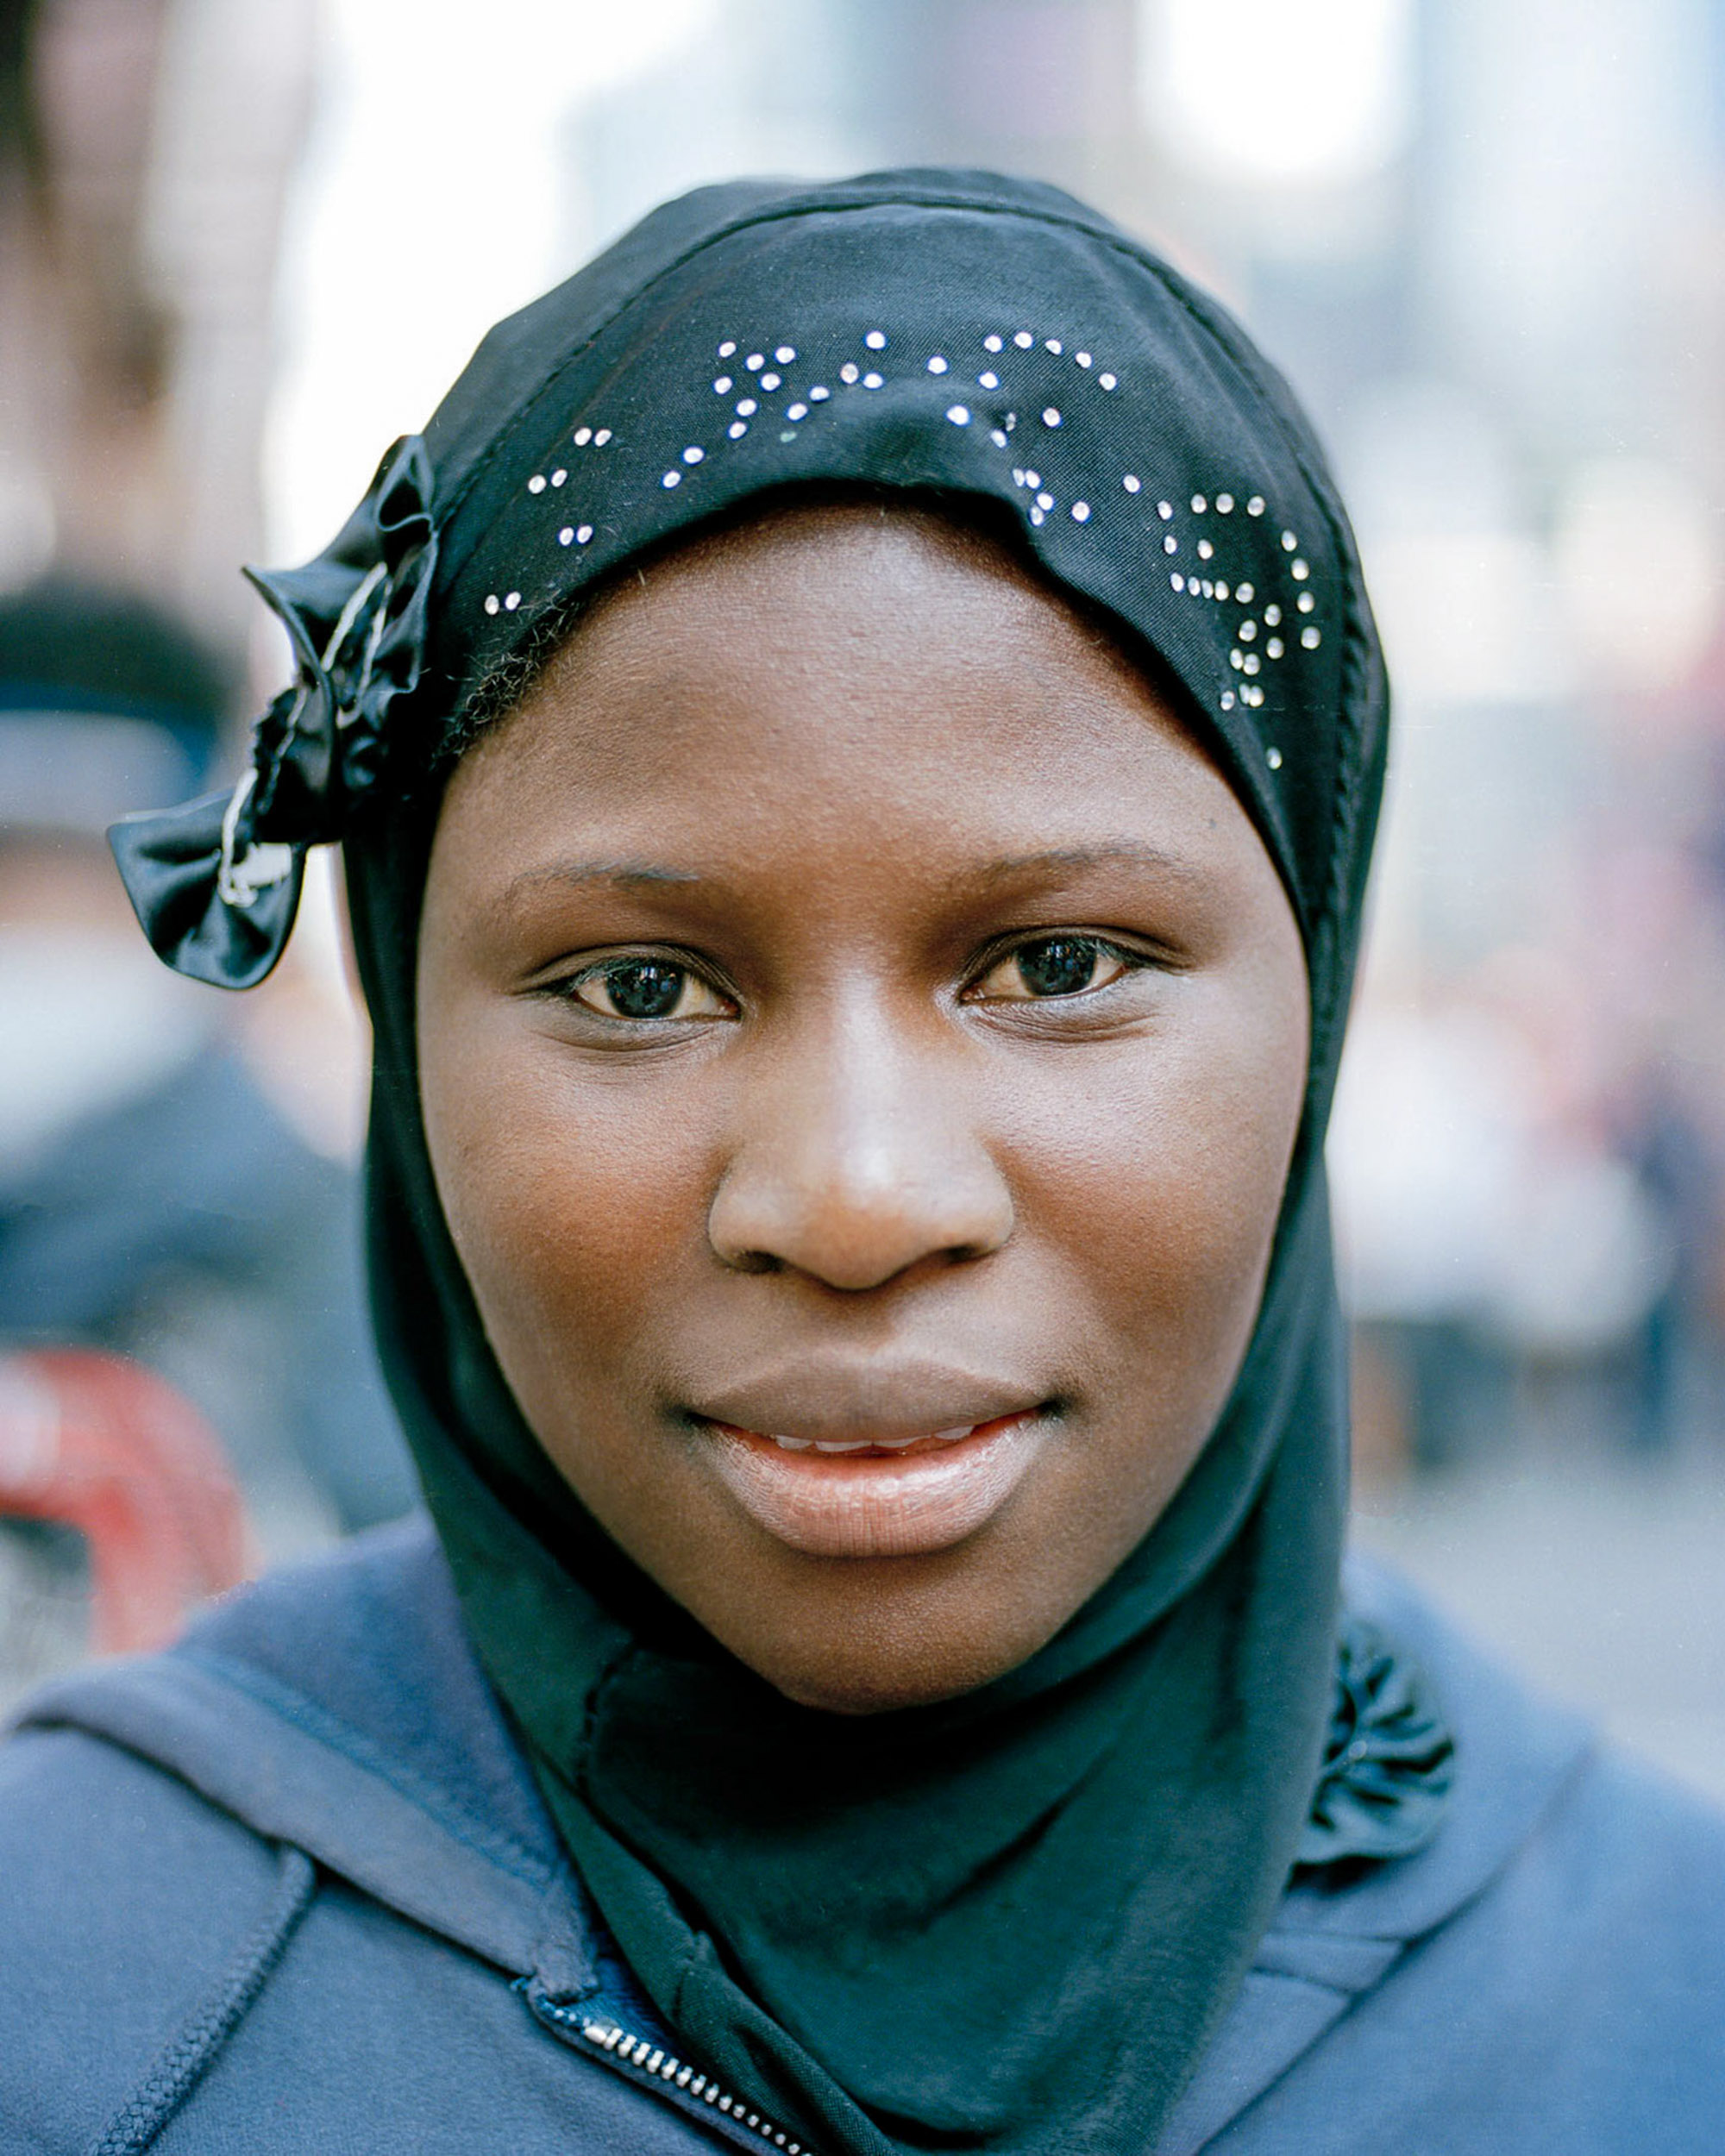 A street portrait of a woman in Times Square New York